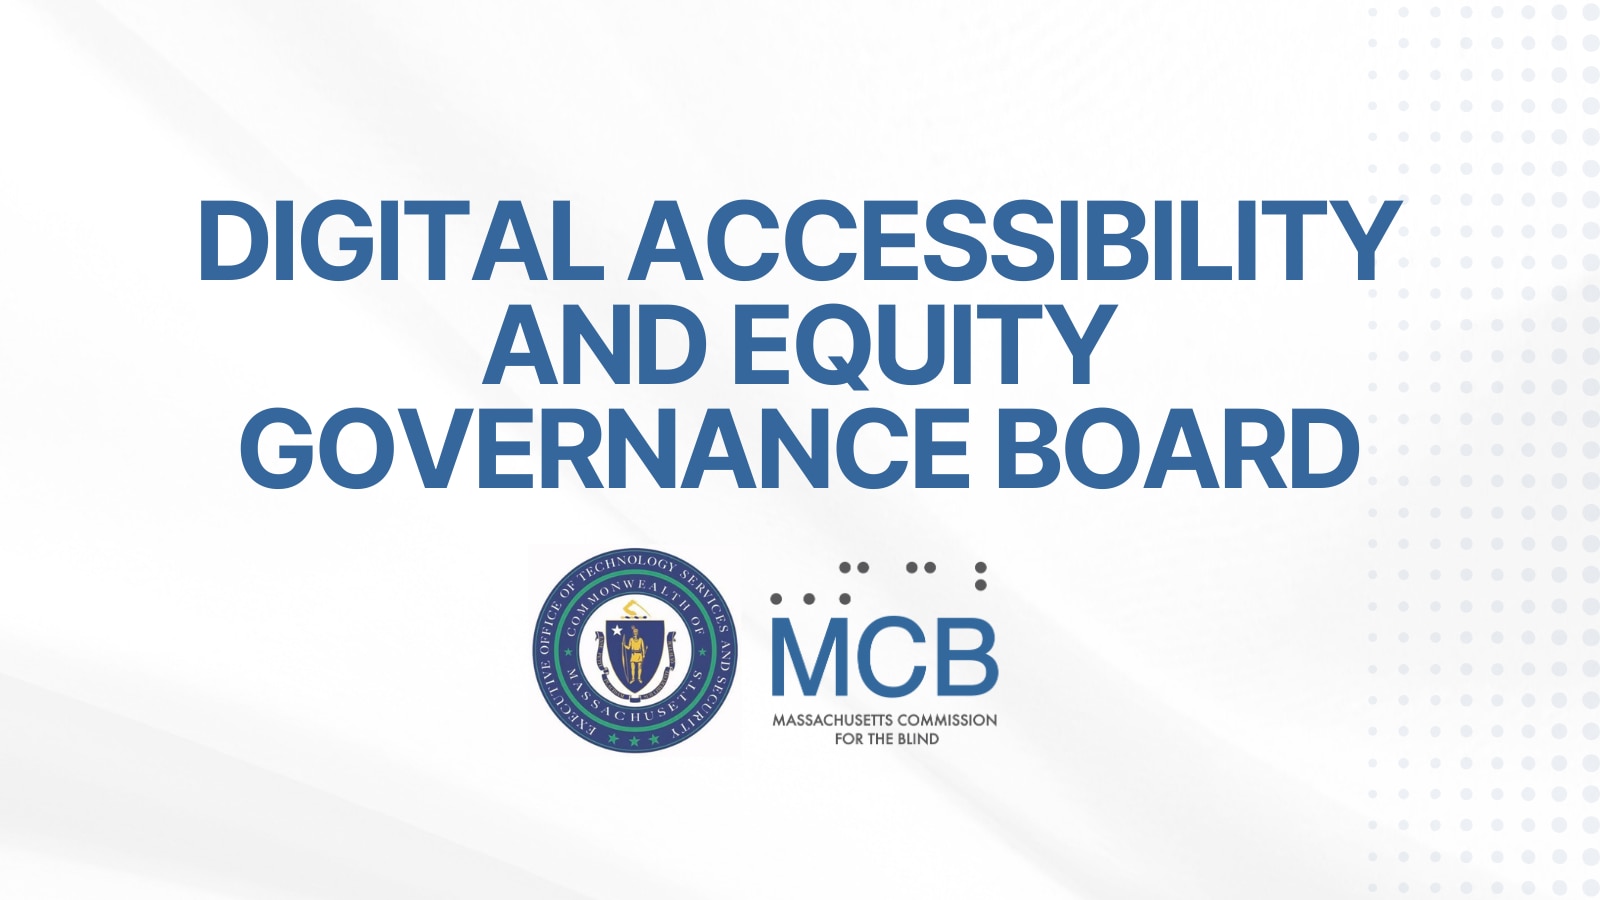 EOTSS and MCB logos with the text: Digital Accessibility and Equity Governance Board